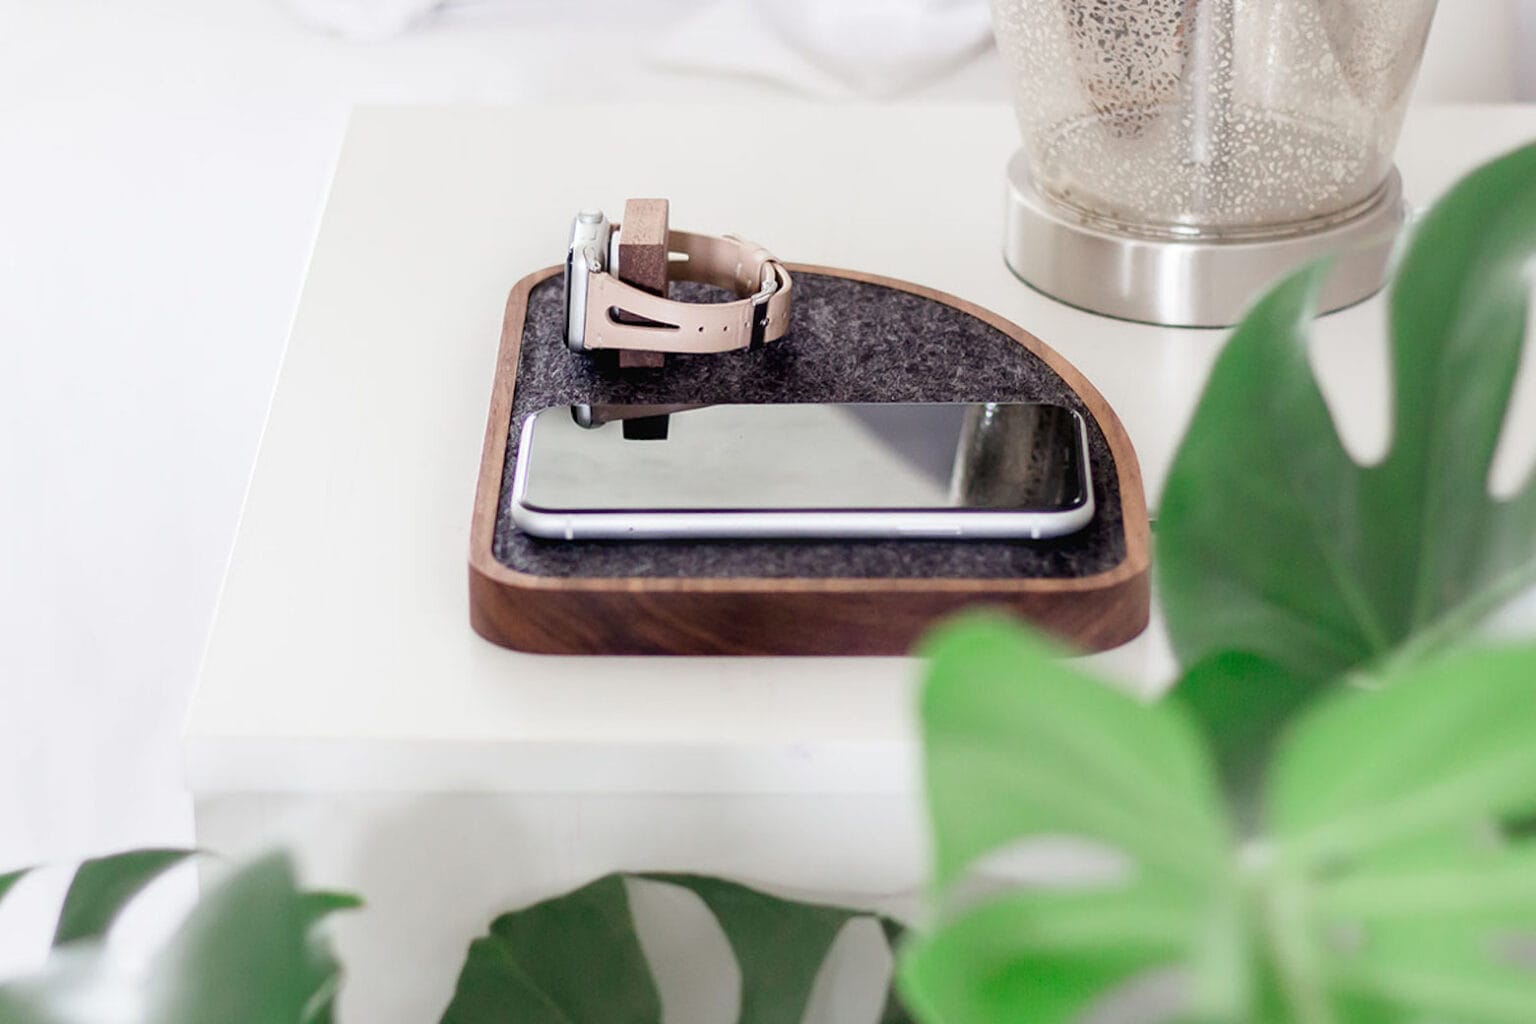 Grab this sleek wireless iPhone charger with 32% off today and eliminate messy cables forever.